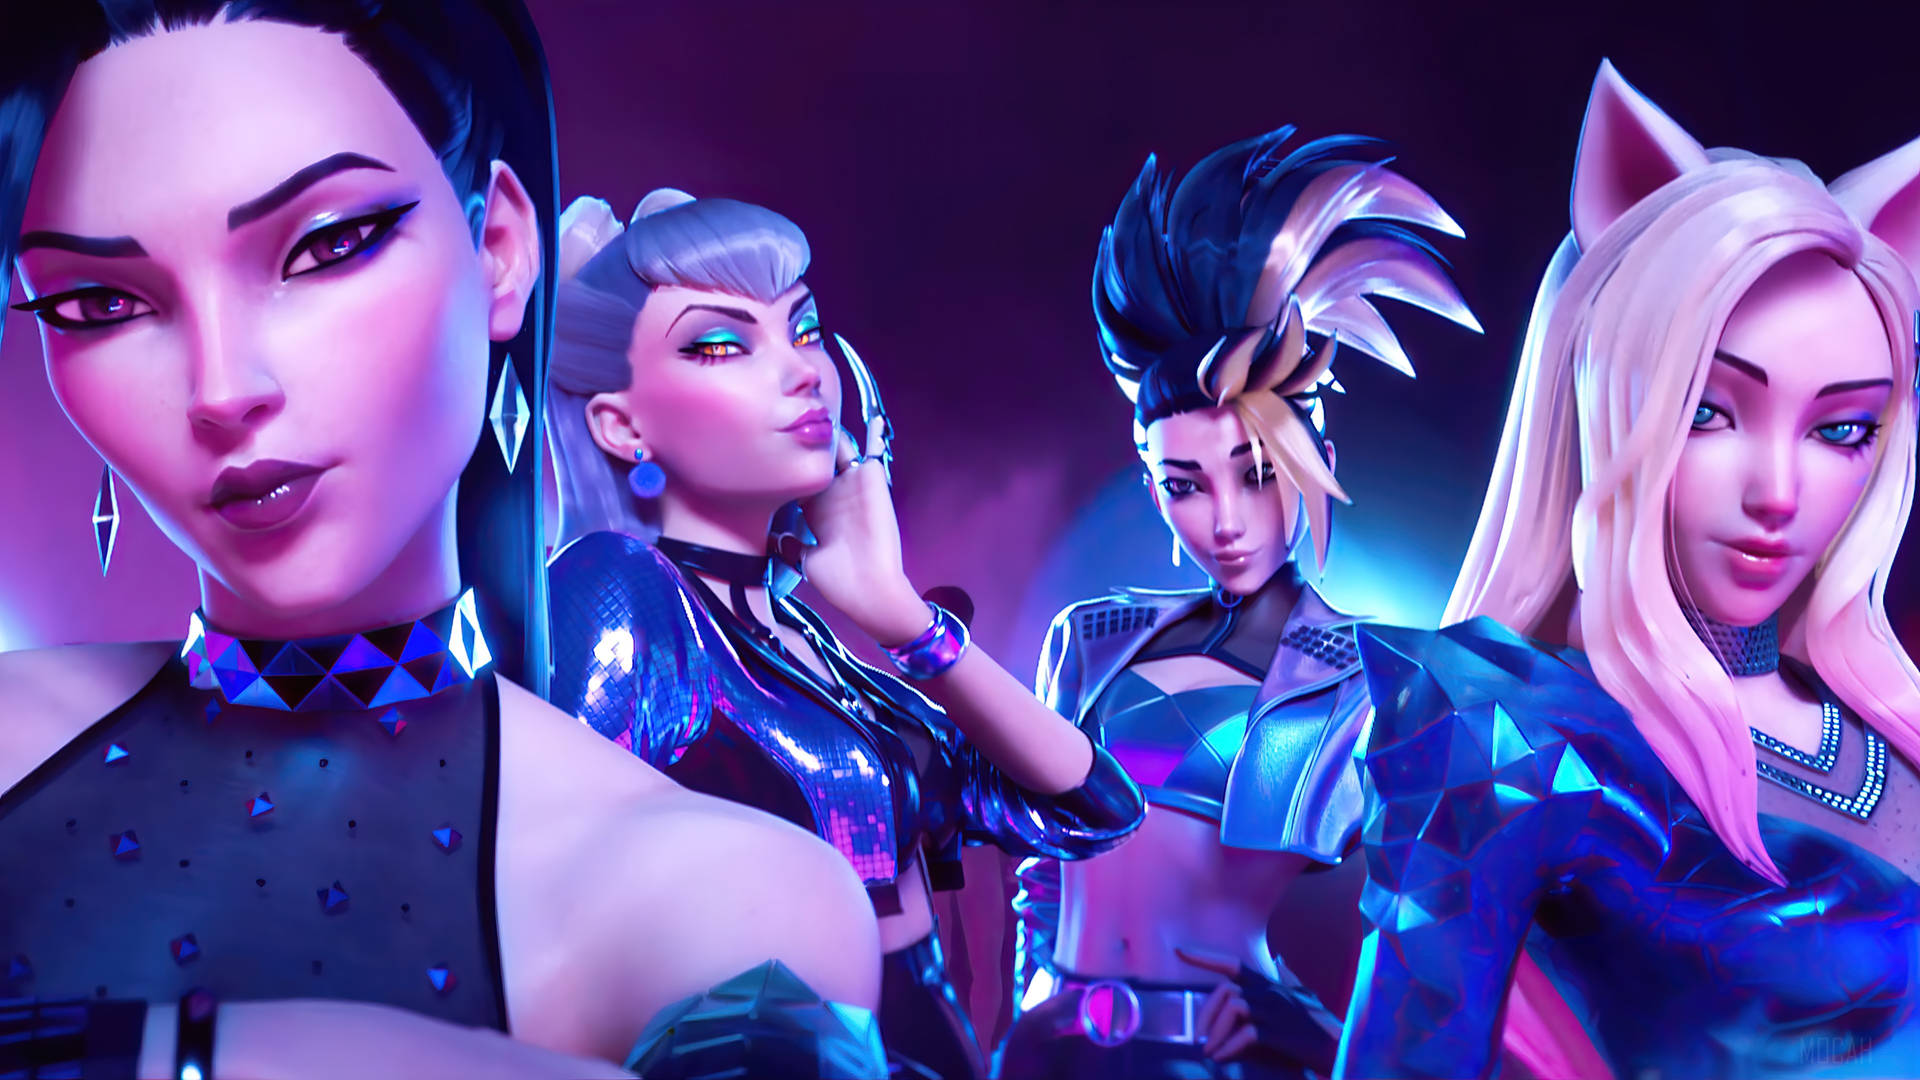 Kda 3840X2160 Wallpaper and Background Image